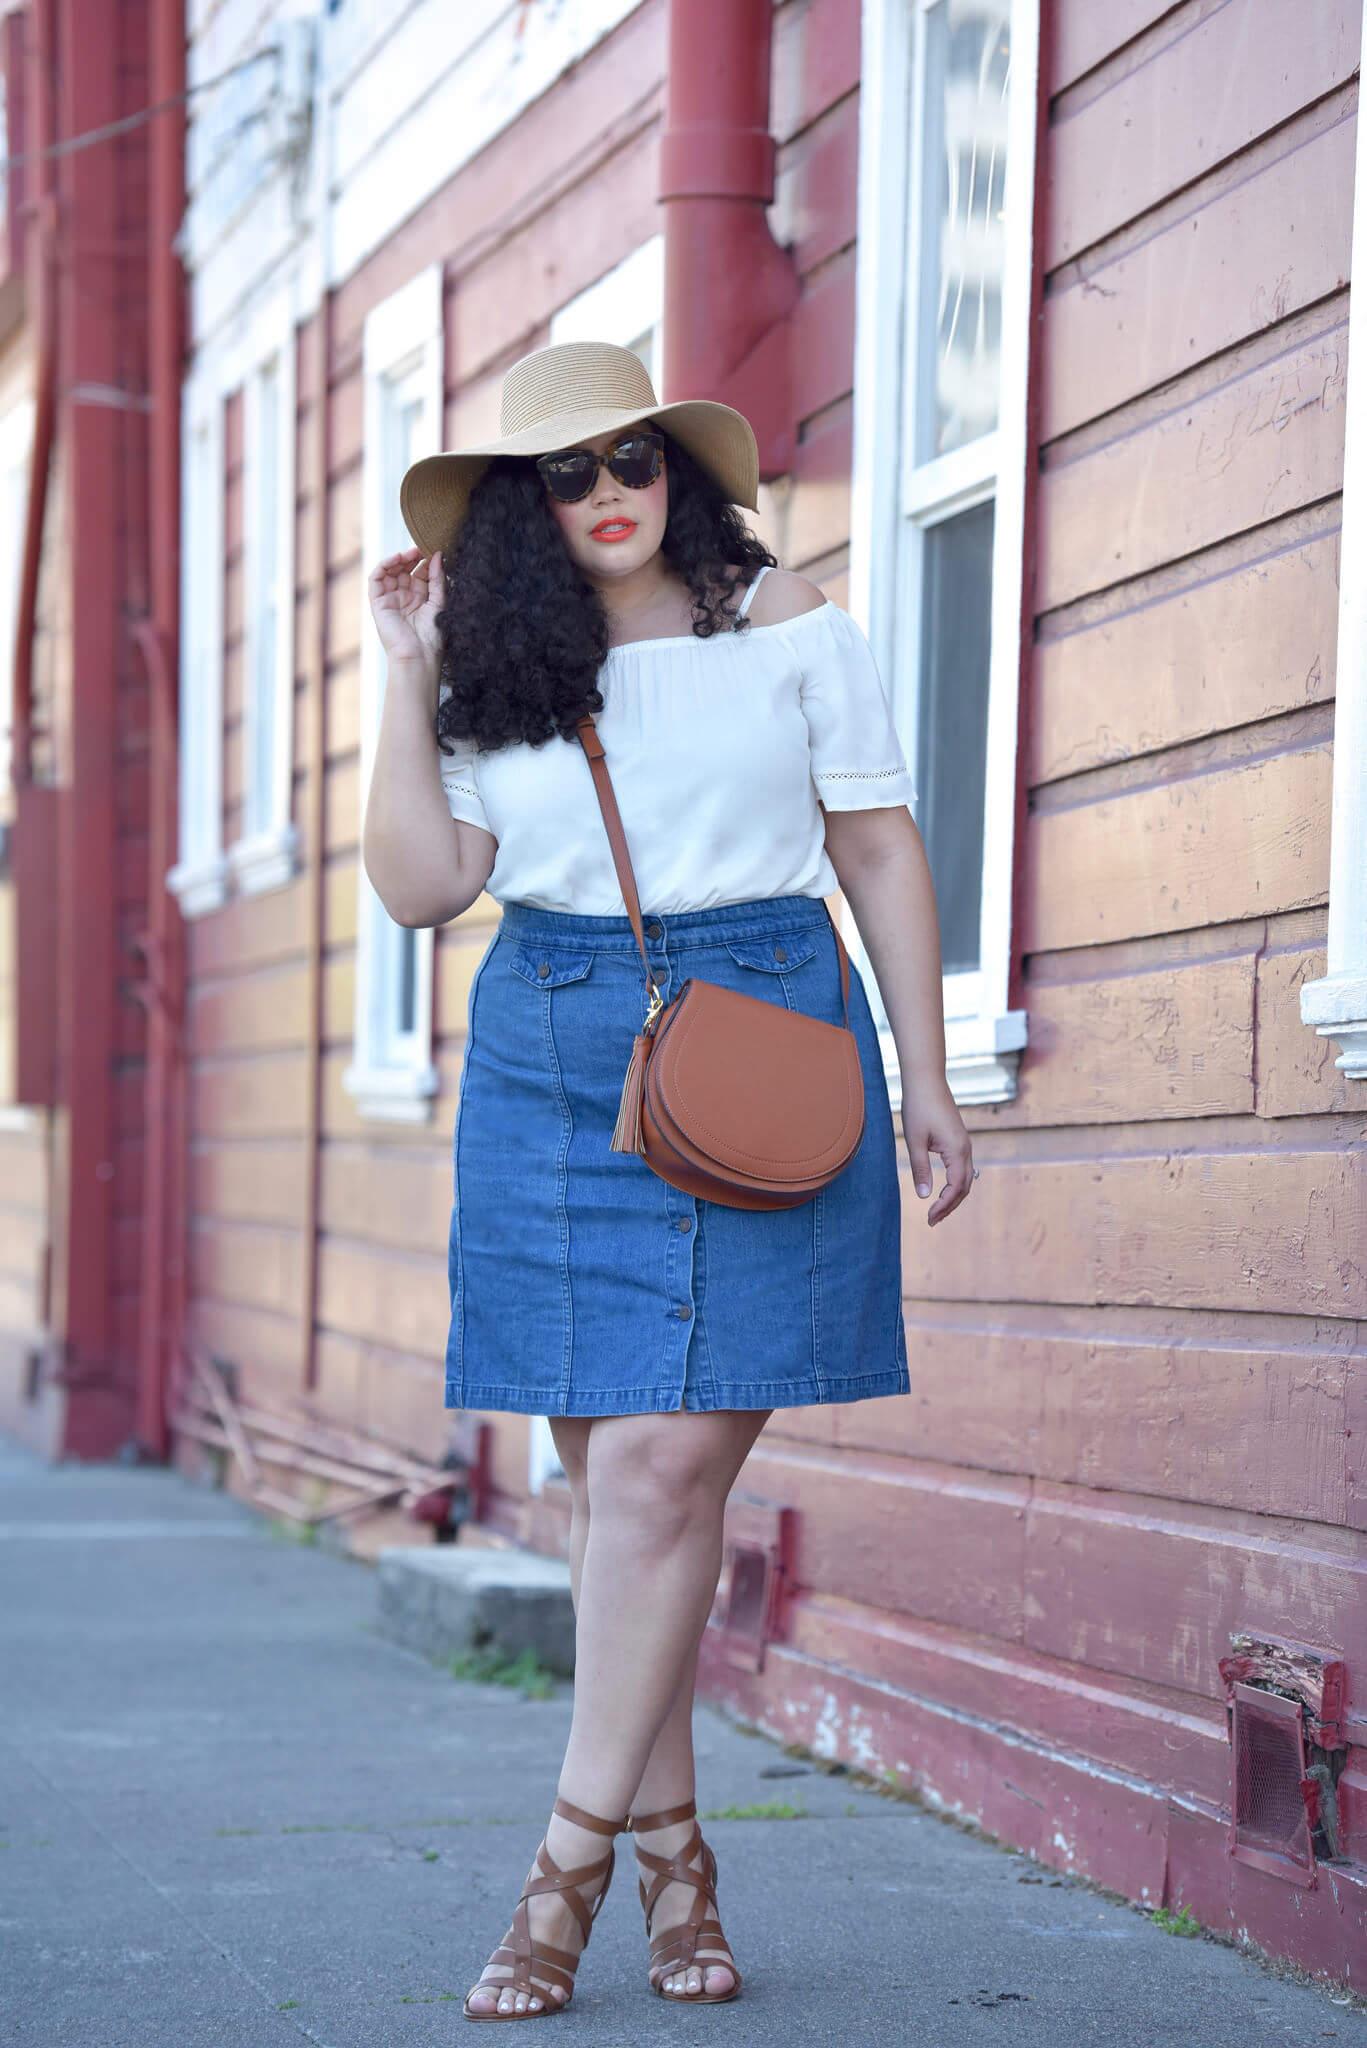 Denim Skirts Outfit